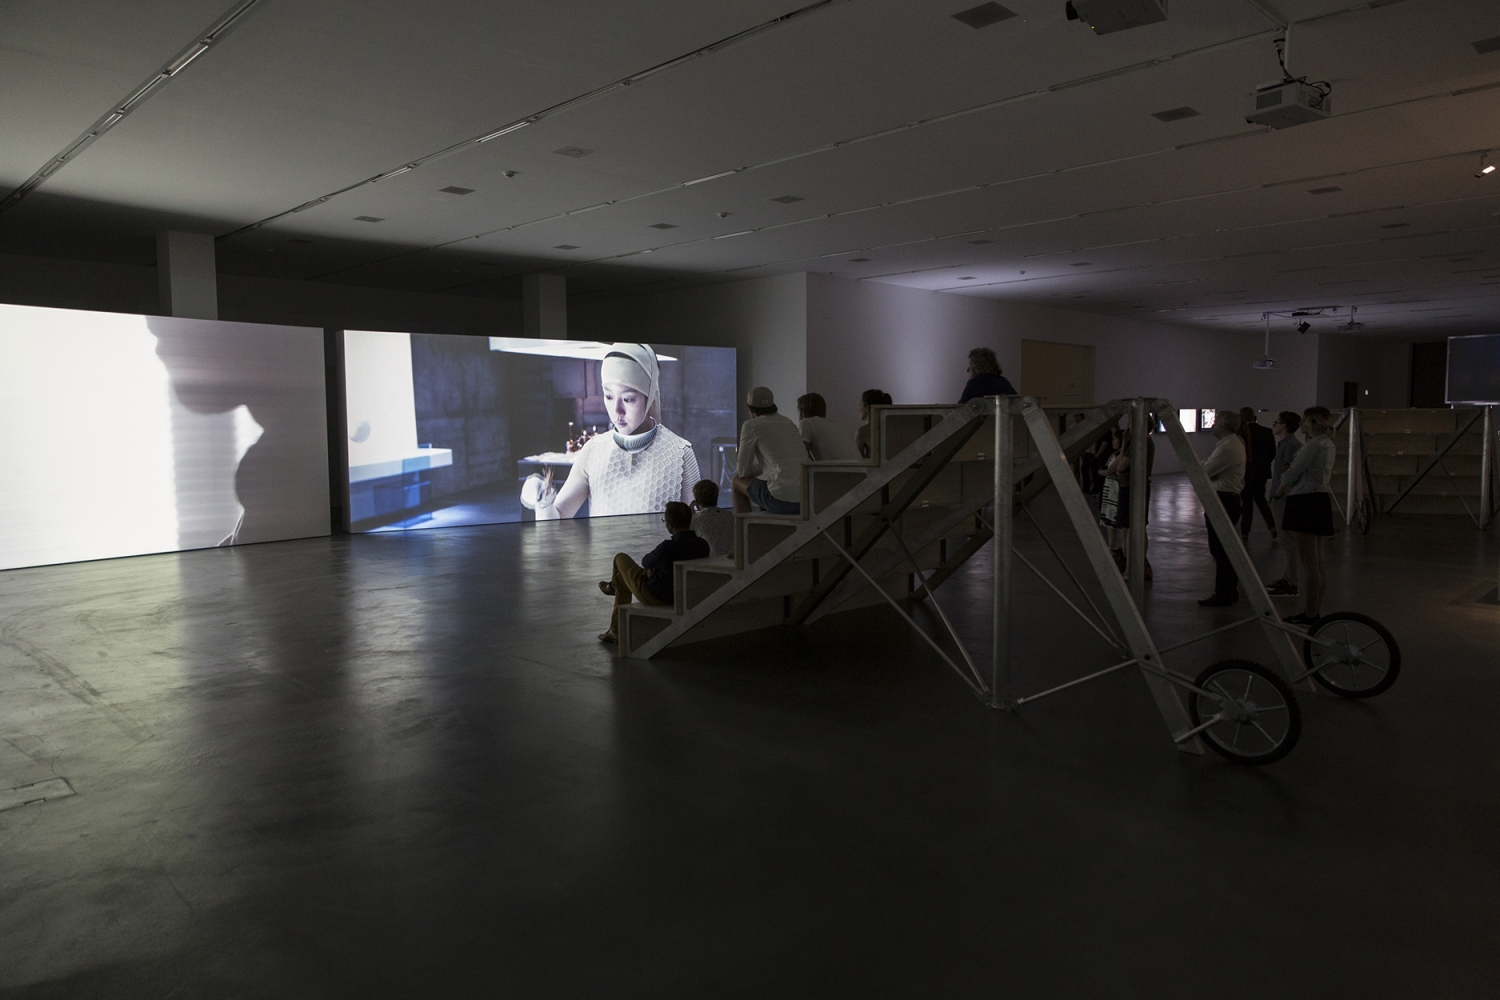 News From Nowhere: Zürich Laboratory at Migros Museum of Contemporary Art